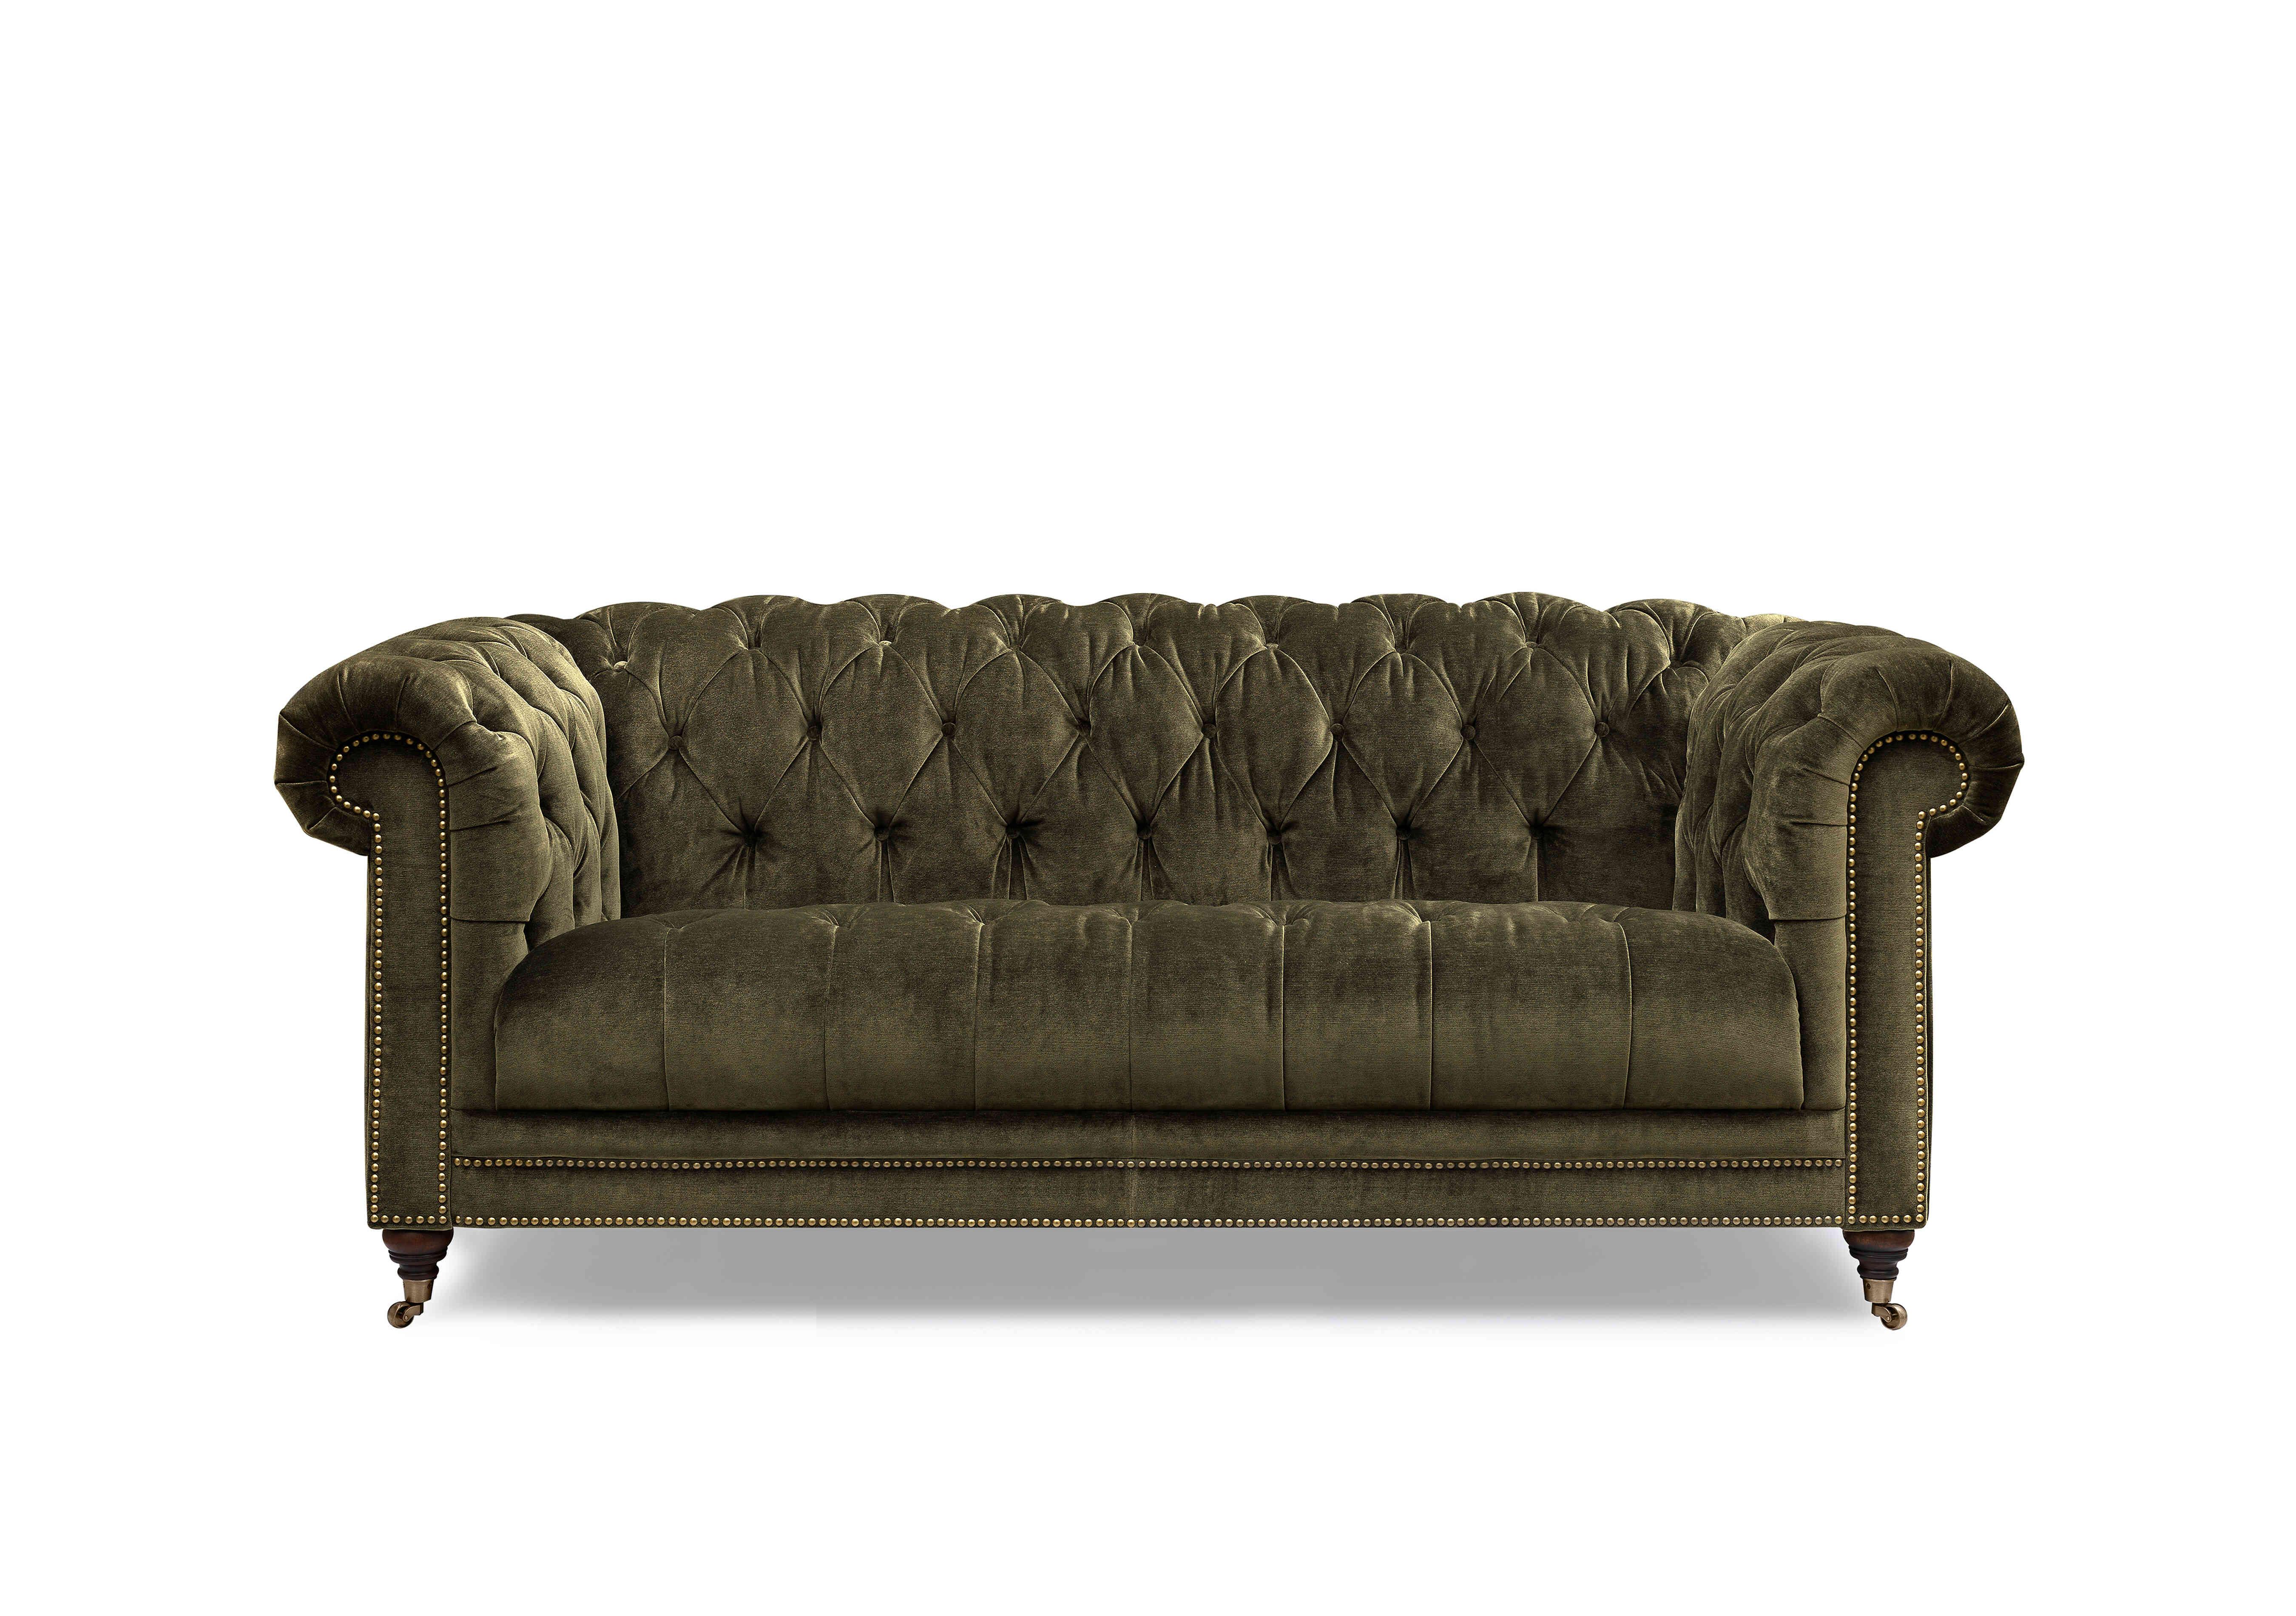 Walter 3 Seater Fabric Chesterfield Sofa in X3y1-W018 Pine on Furniture Village